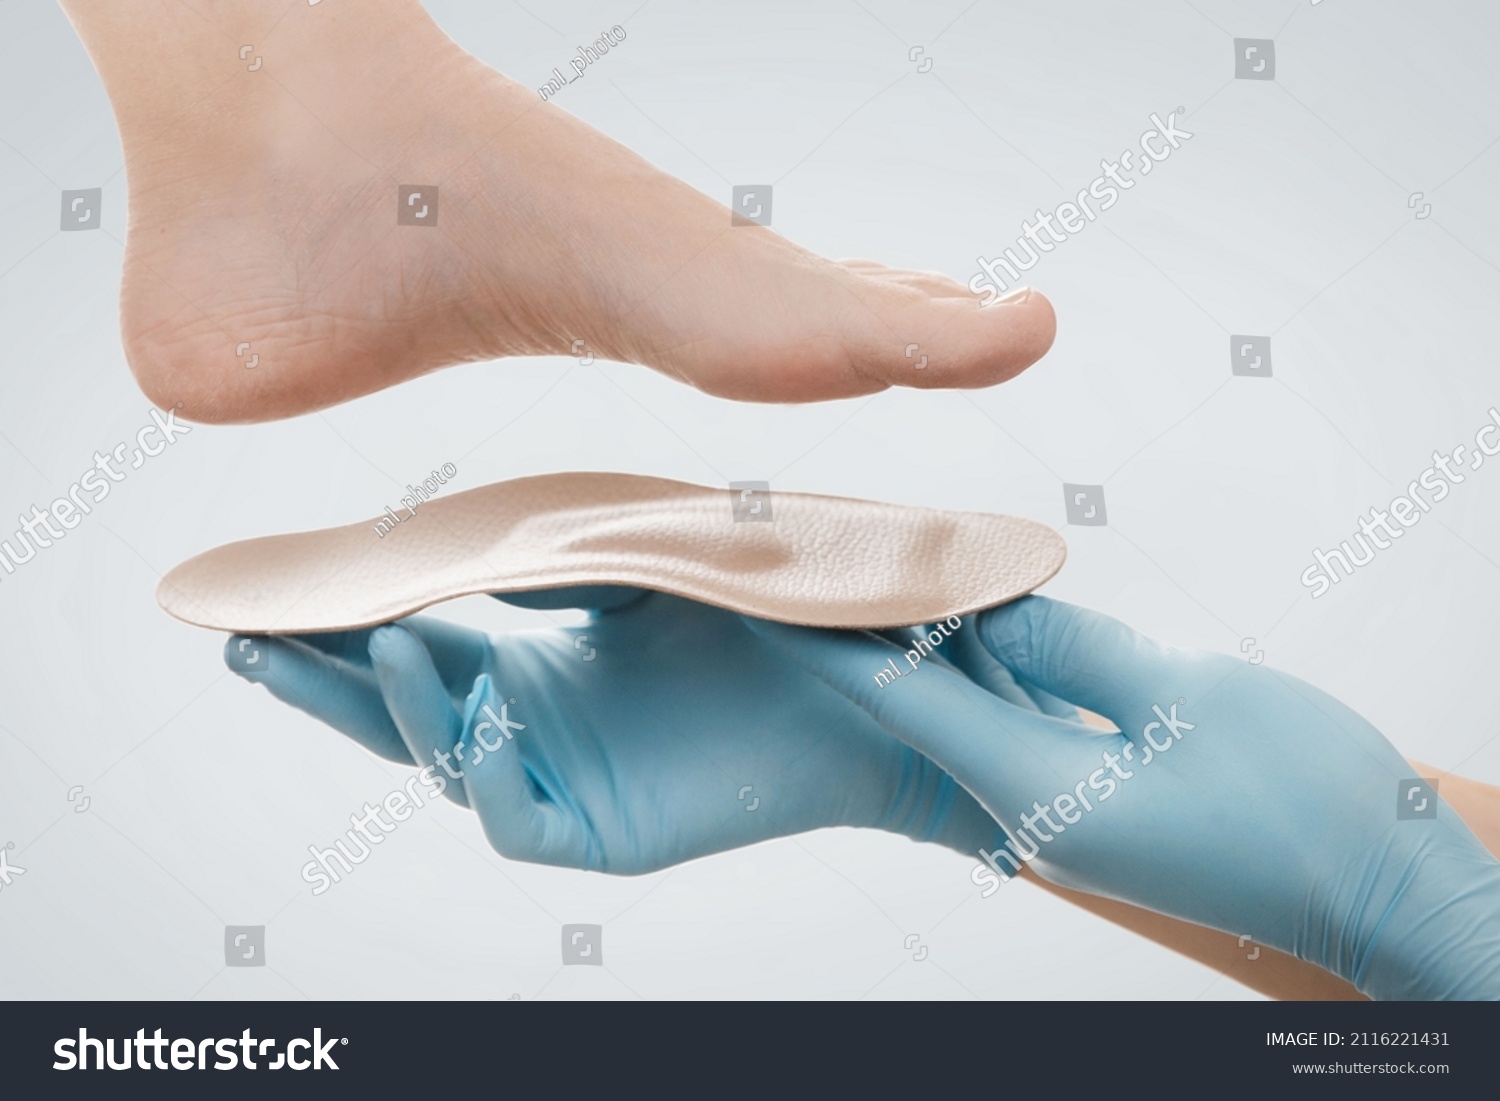 Orthopedic insole isolated on a white background. Hands in rubber gloves hold an orthopedic insole. Foot care, comfort for the feet. Doctor orthopedist tests the medical device. Flat feet correction. #2116221431